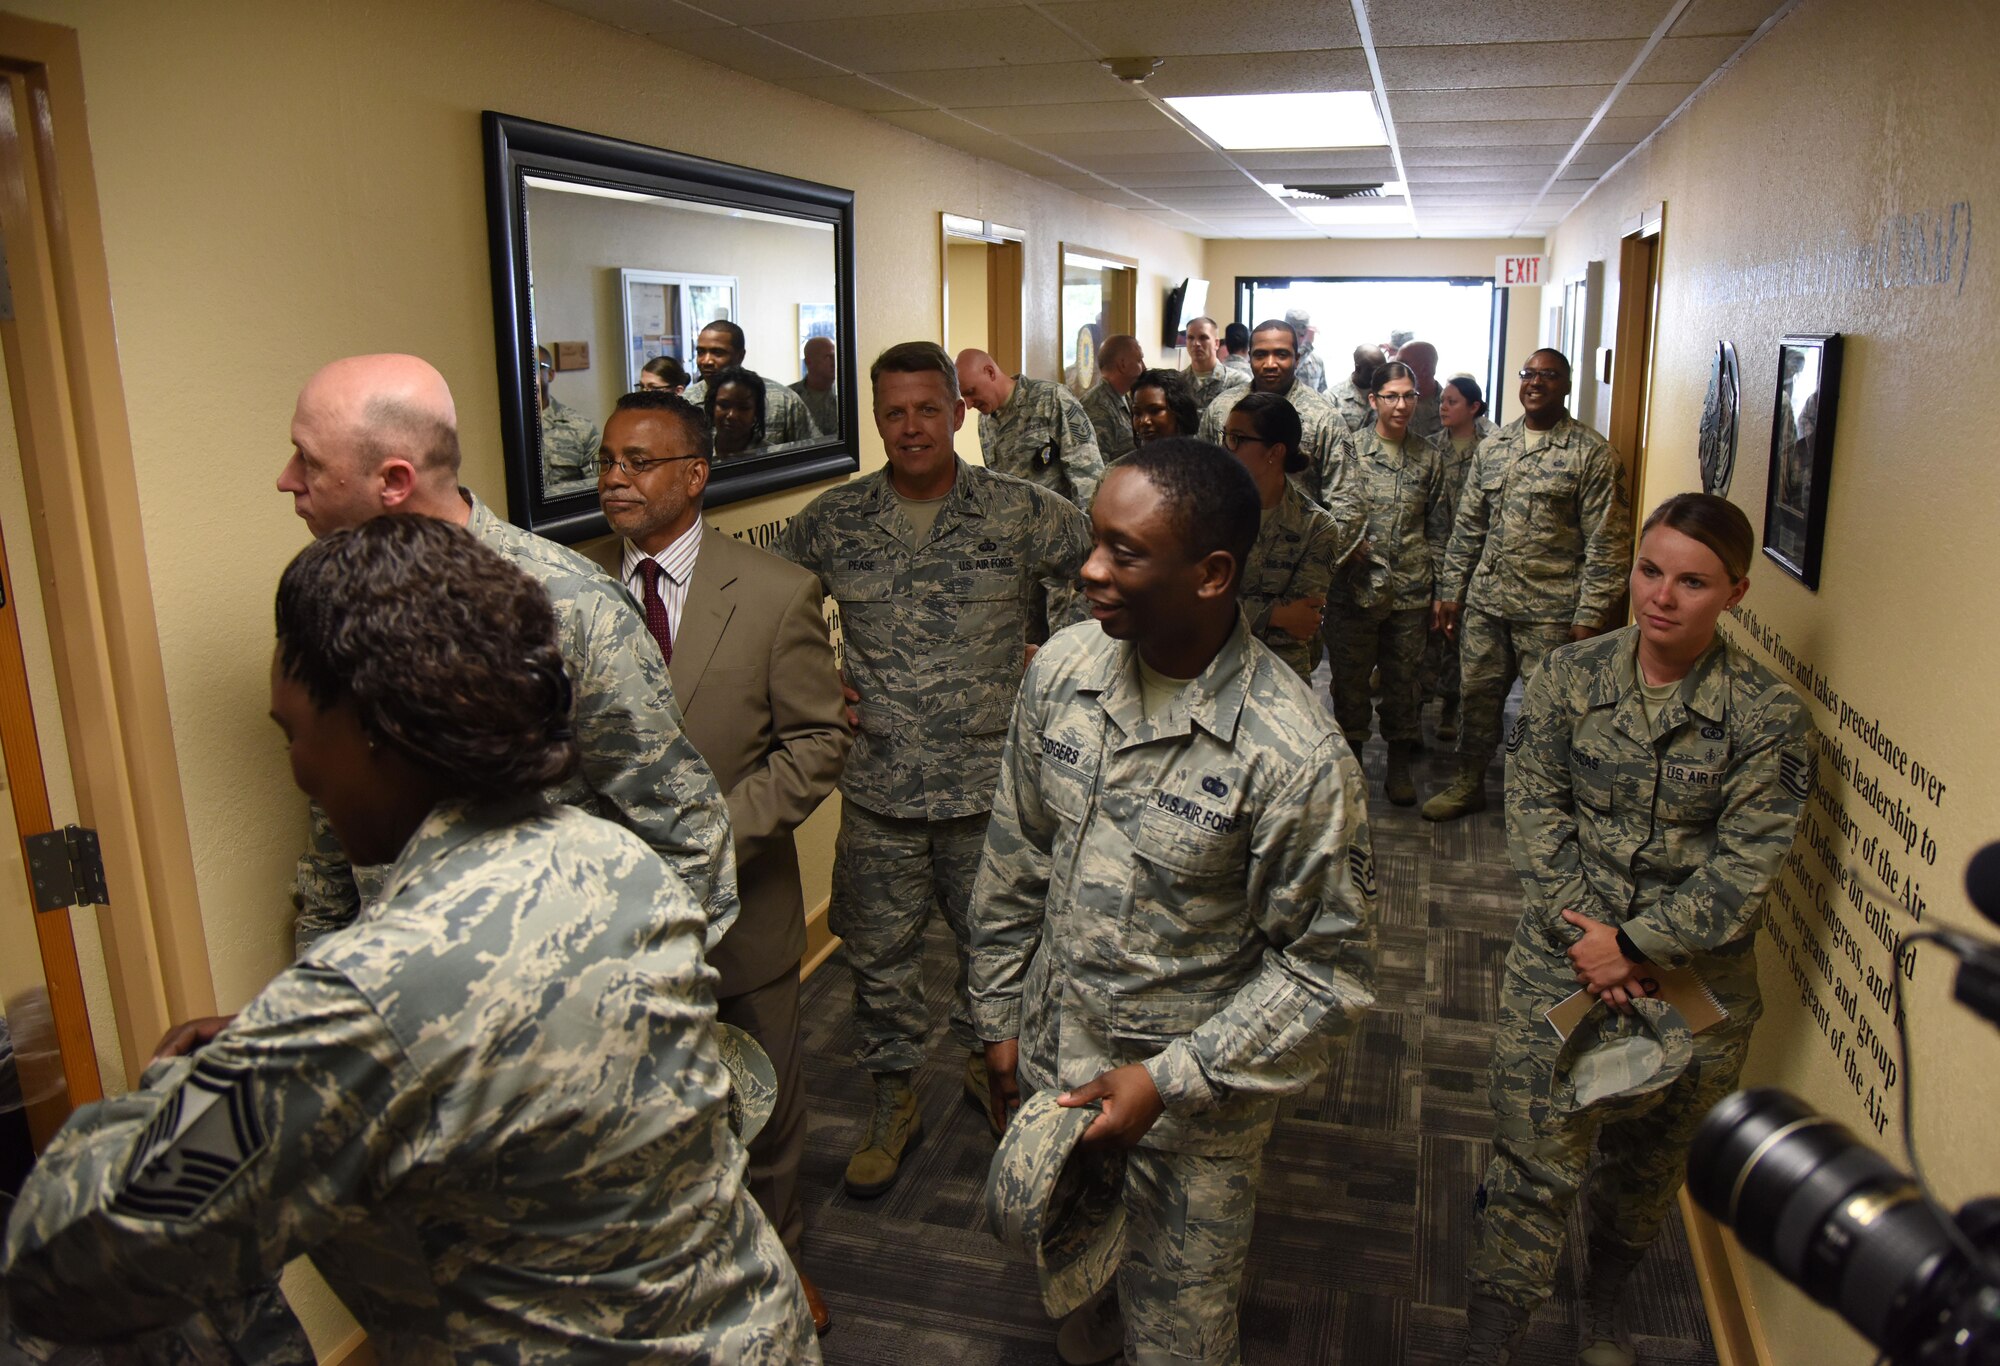 Keesler personnel fill the halls of the Professional Development Center during the grand reopening and ribbon cutting ceremony May 17, 2017, on Keesler Air Force Base, Miss. The renovated facility offers developmental opportunities and various courses that fit the needs of officers, enlisted, civilians or reservists. (U.S. Air Force photo by Kemberly Groue)